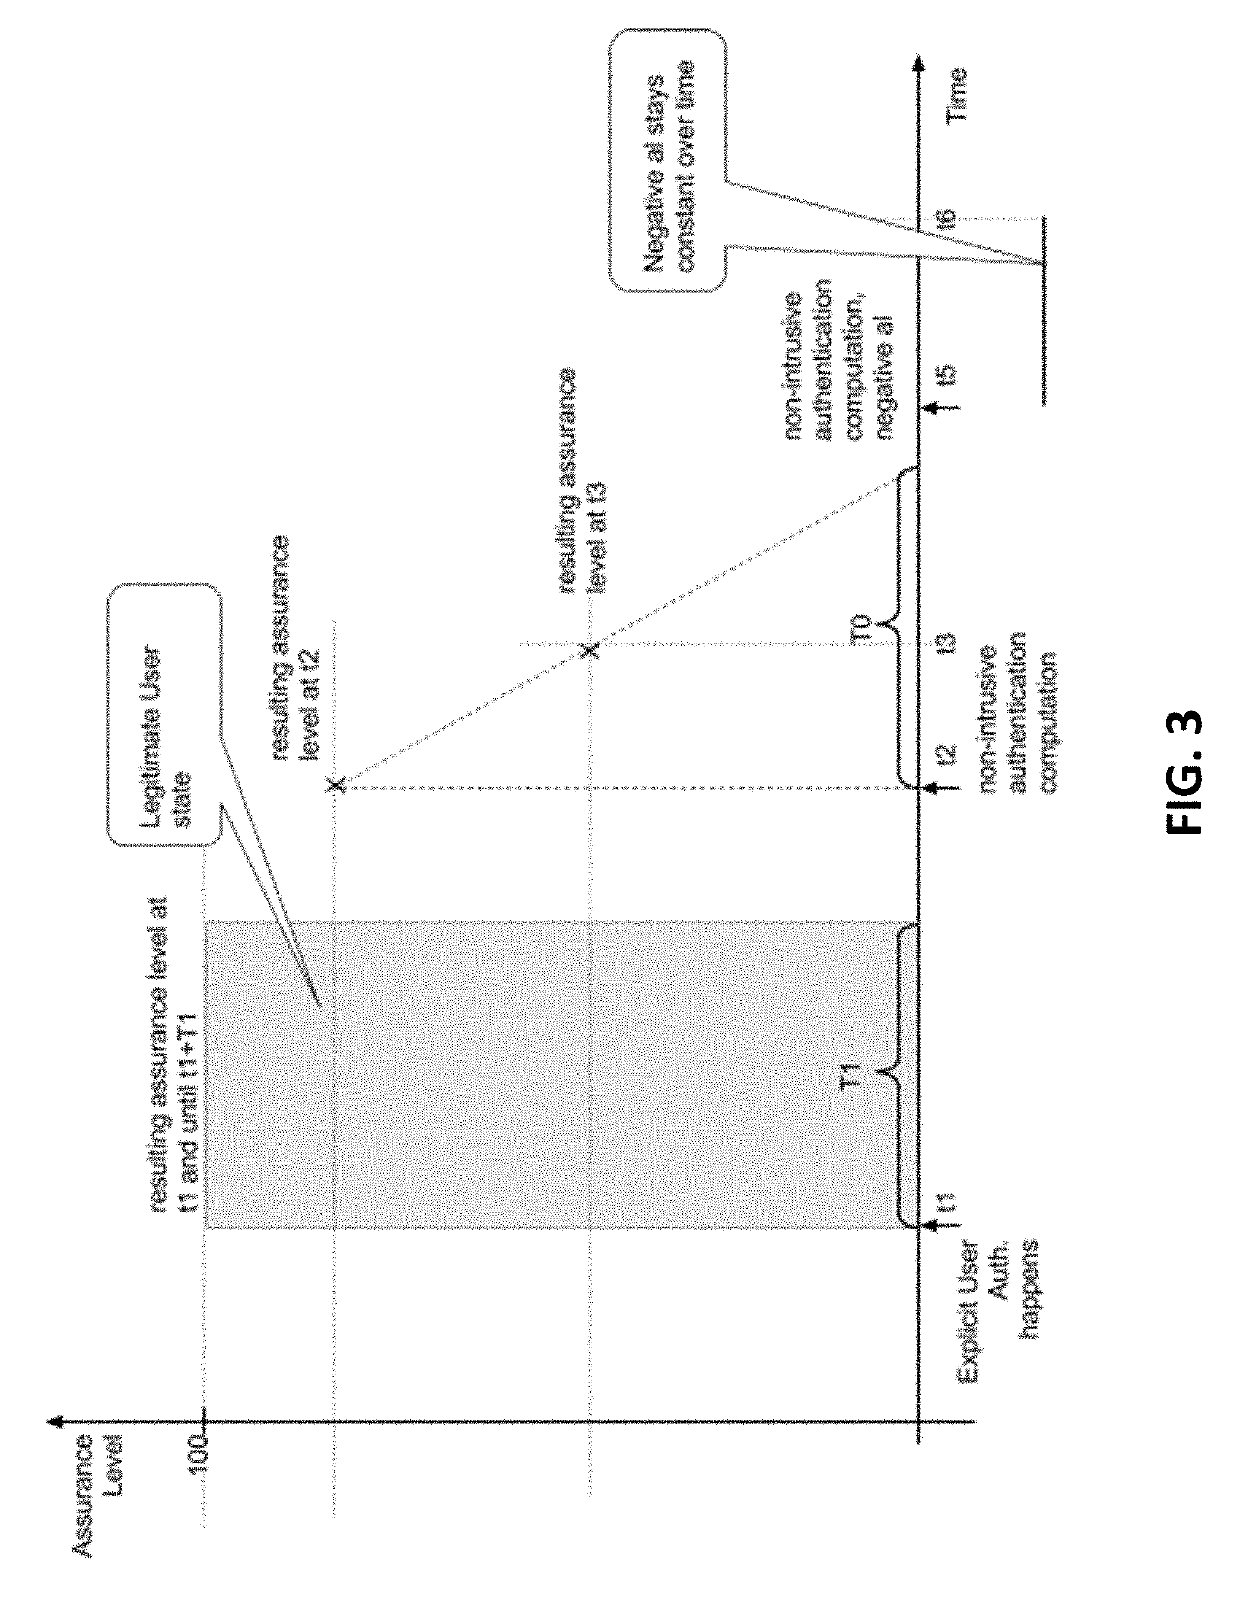 System and method for binding verifiable claims